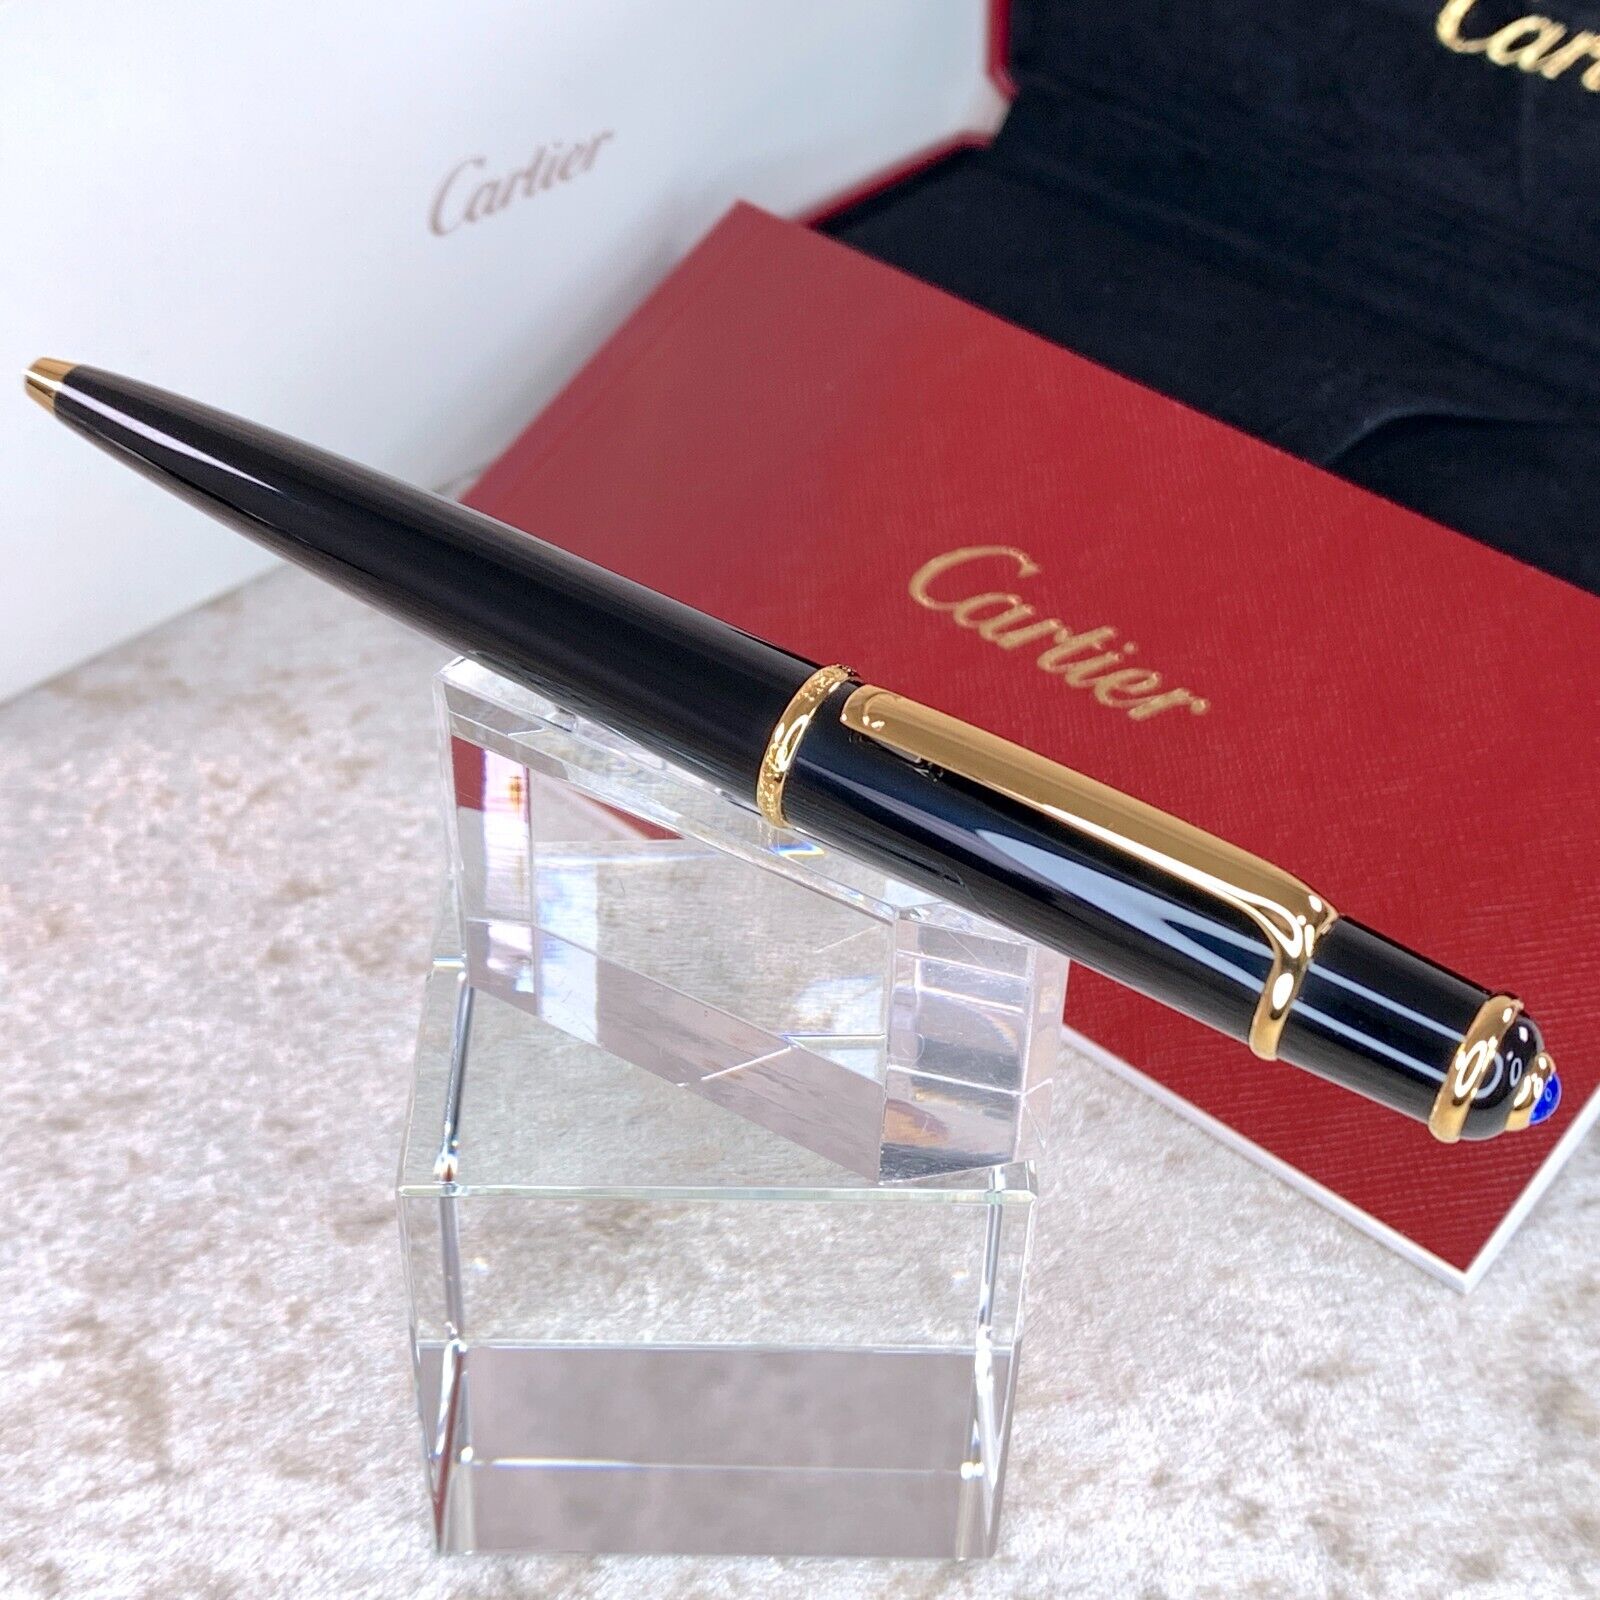 Cartier Ballpoint Pen Diabolo Black Resin & 18K Gold Finish with Box&Papers